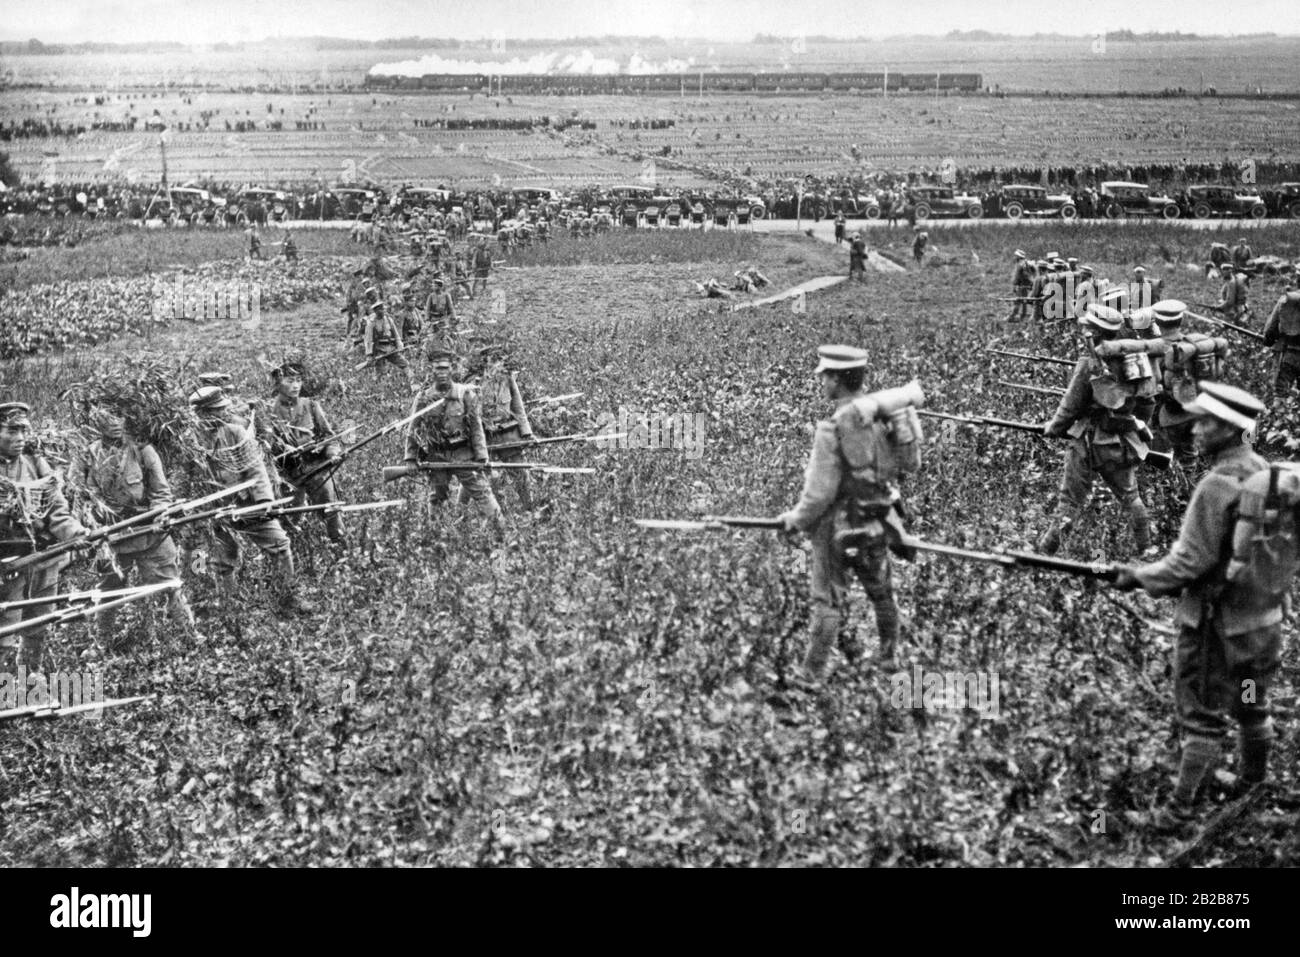 View over a wide field during an exercise maneuver of the Japanese military. In the foreground infantrymen of the enemy parties of the exercise are facing each other. They carry rifles with bayonets attached. Behind them is a country road lined with carts and cars. In the background a train is running. (Undated photo, ca. 1930s) Stock Photo